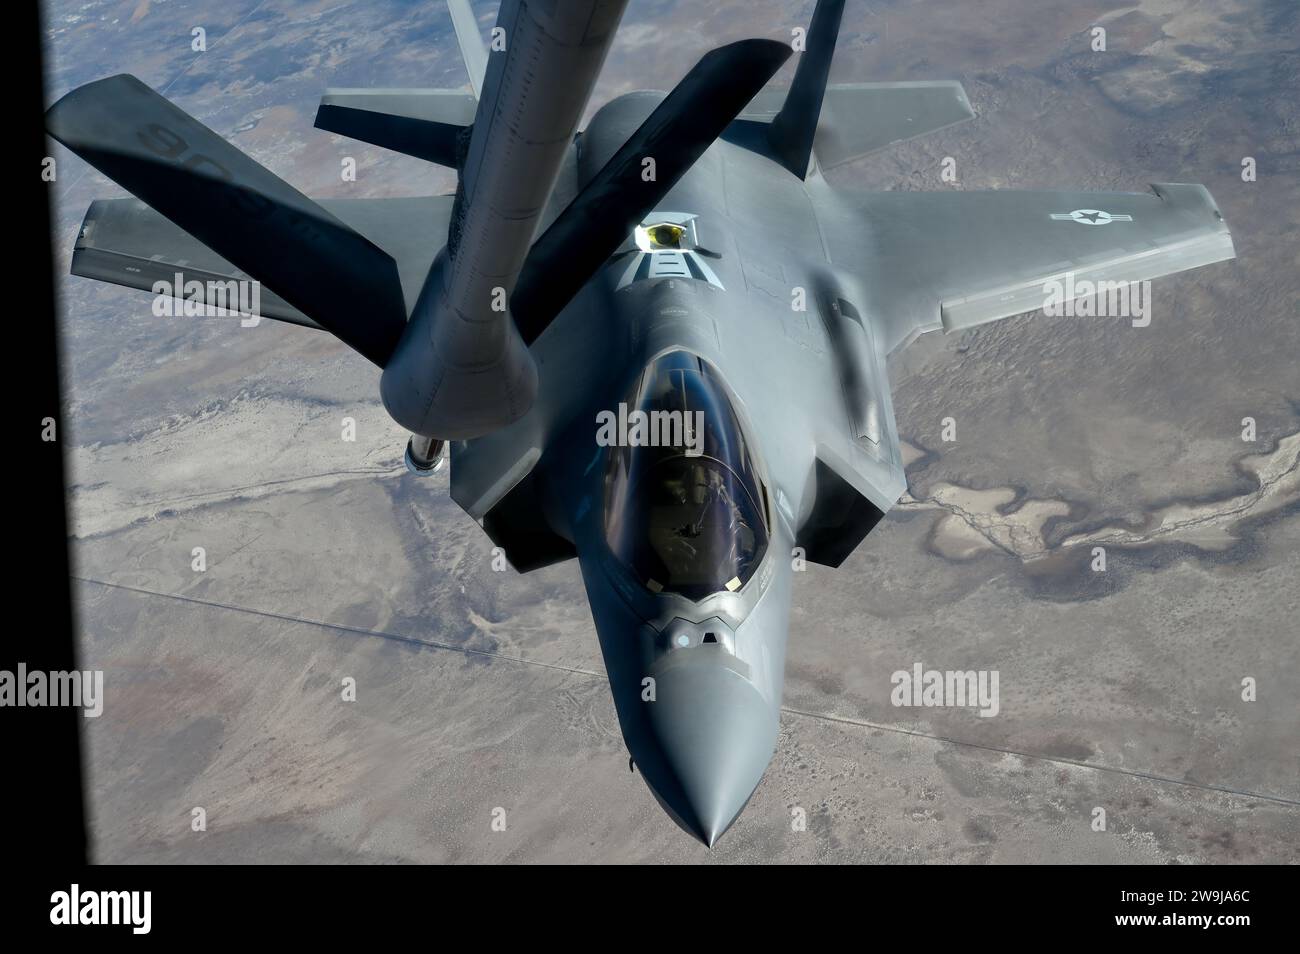 Nellis Air Force Base, United States. 11 December, 2023. A U.S Air Force F-35A Lightning II stealth fighter aircraft approaches for inflight refueling by a USAF KC-135 Stratotanker during the Weapons Integration course over the Nevada Test and Training Range, December 11, 2023 over Nellis Air Force Base, Nevada.  Credit: SrA Haiden Morris/U.S. Air Force/Alamy Live News Stock Photo